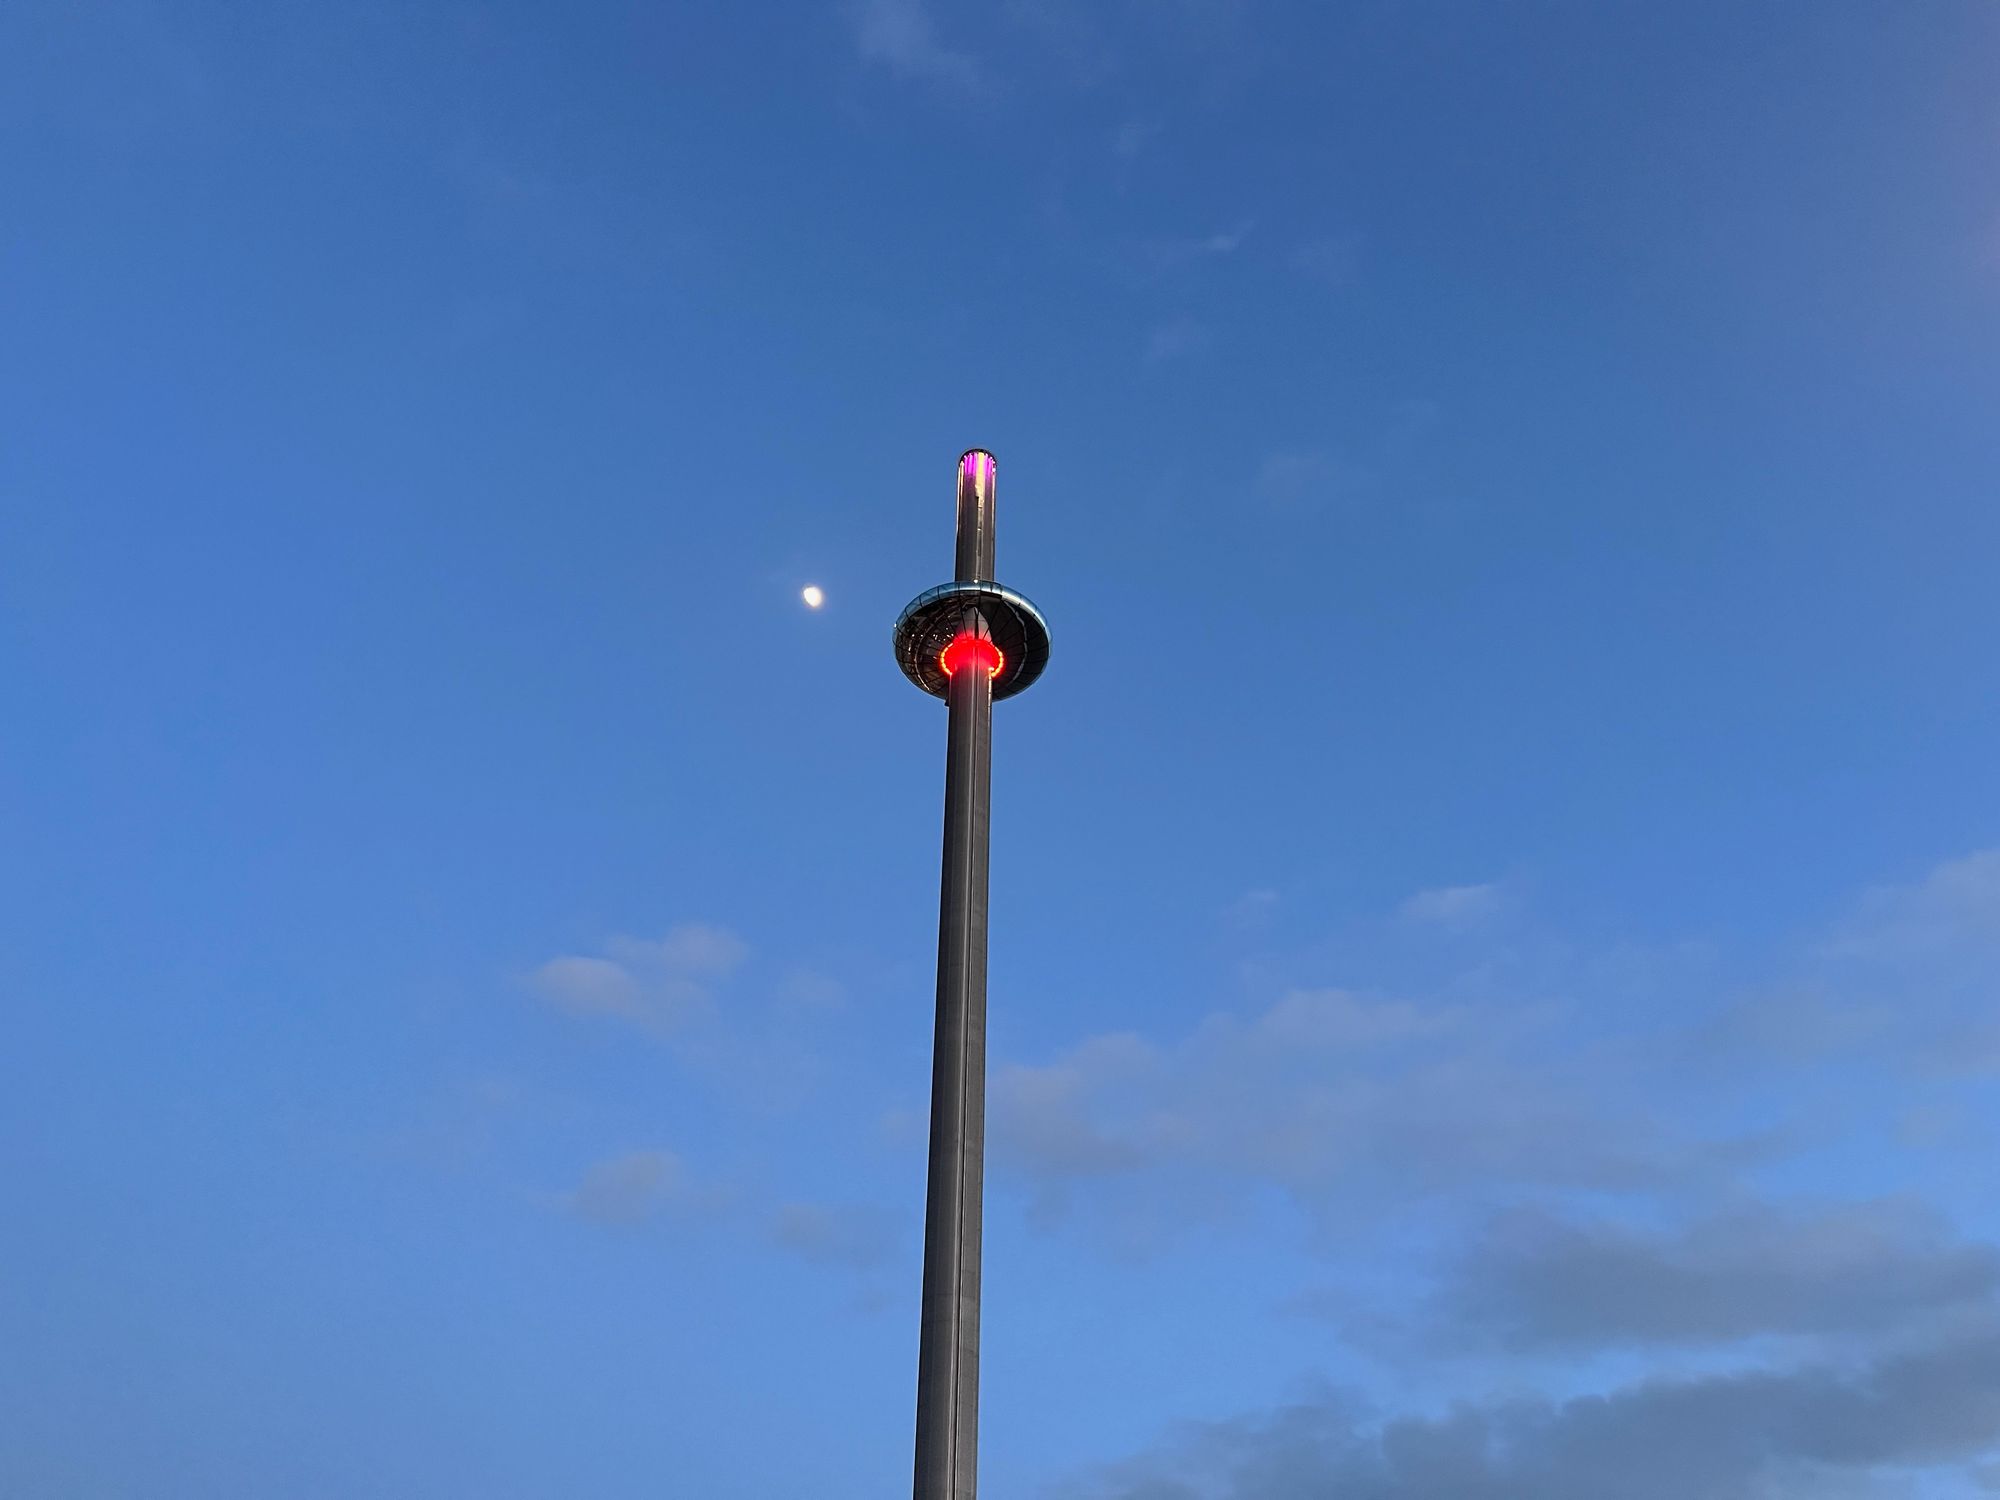 A picture of the i360 from below with the moon in the background